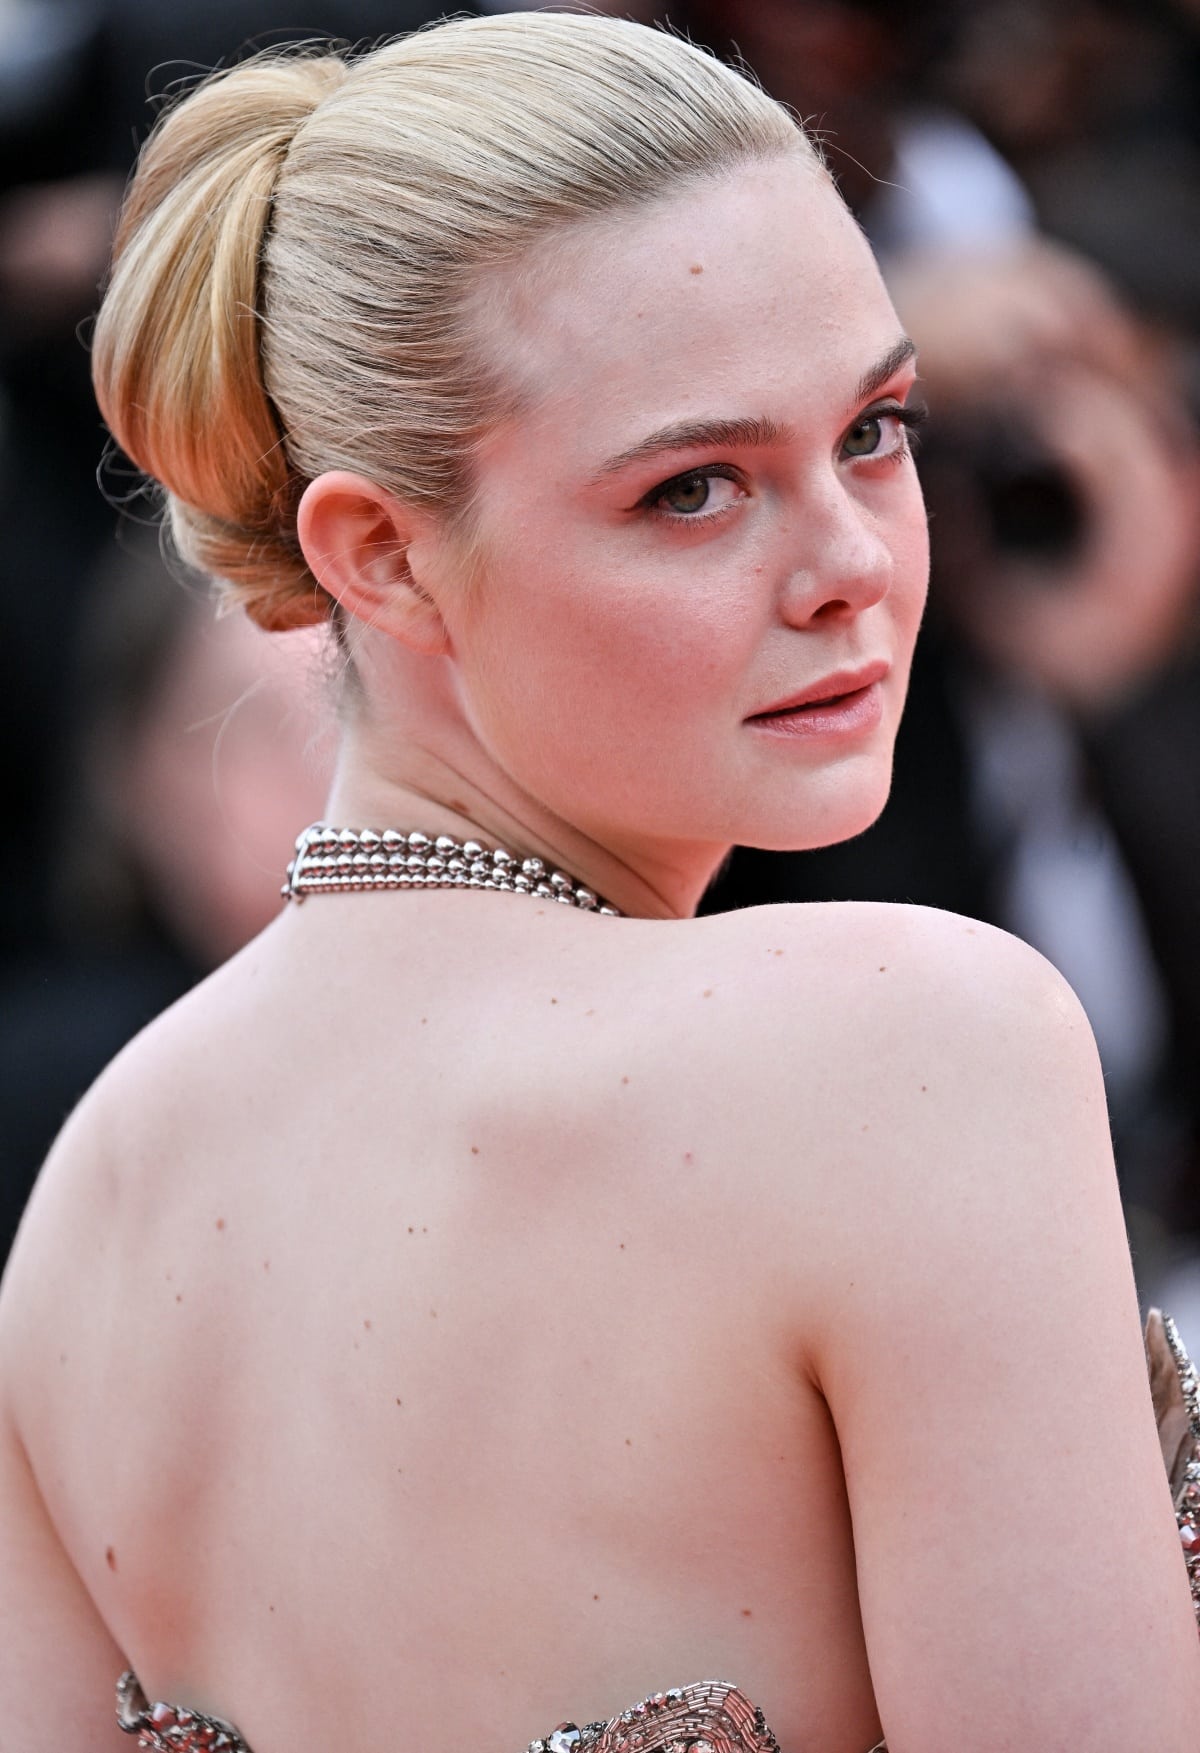 Elle Fanning’s hair was swept up in a chic updo to show off her gorgeous face and flawless beauty look